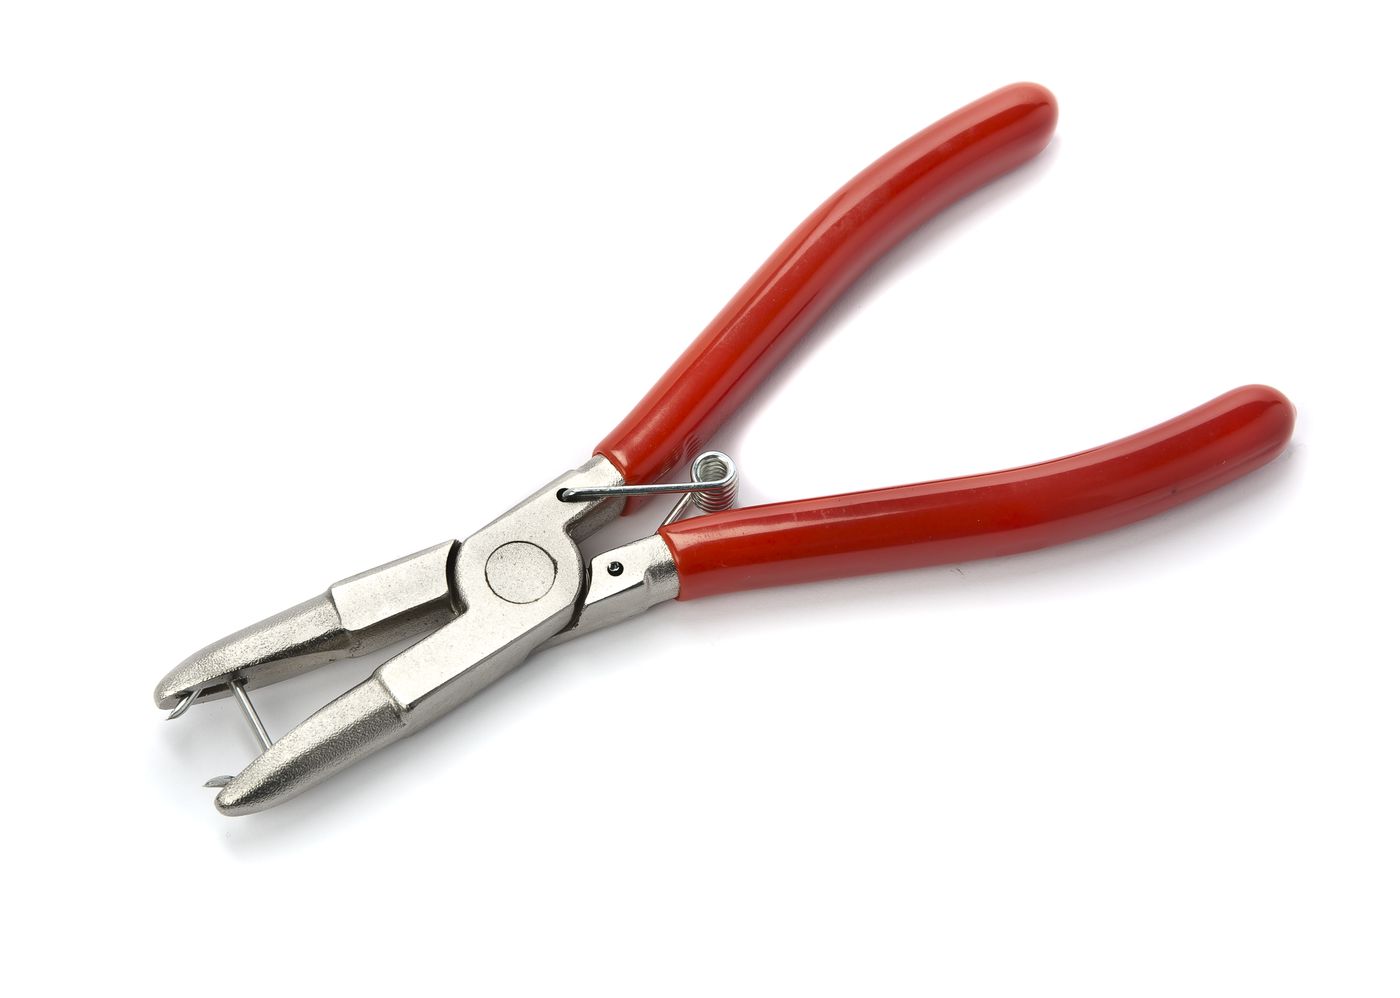 Upholstery pliers